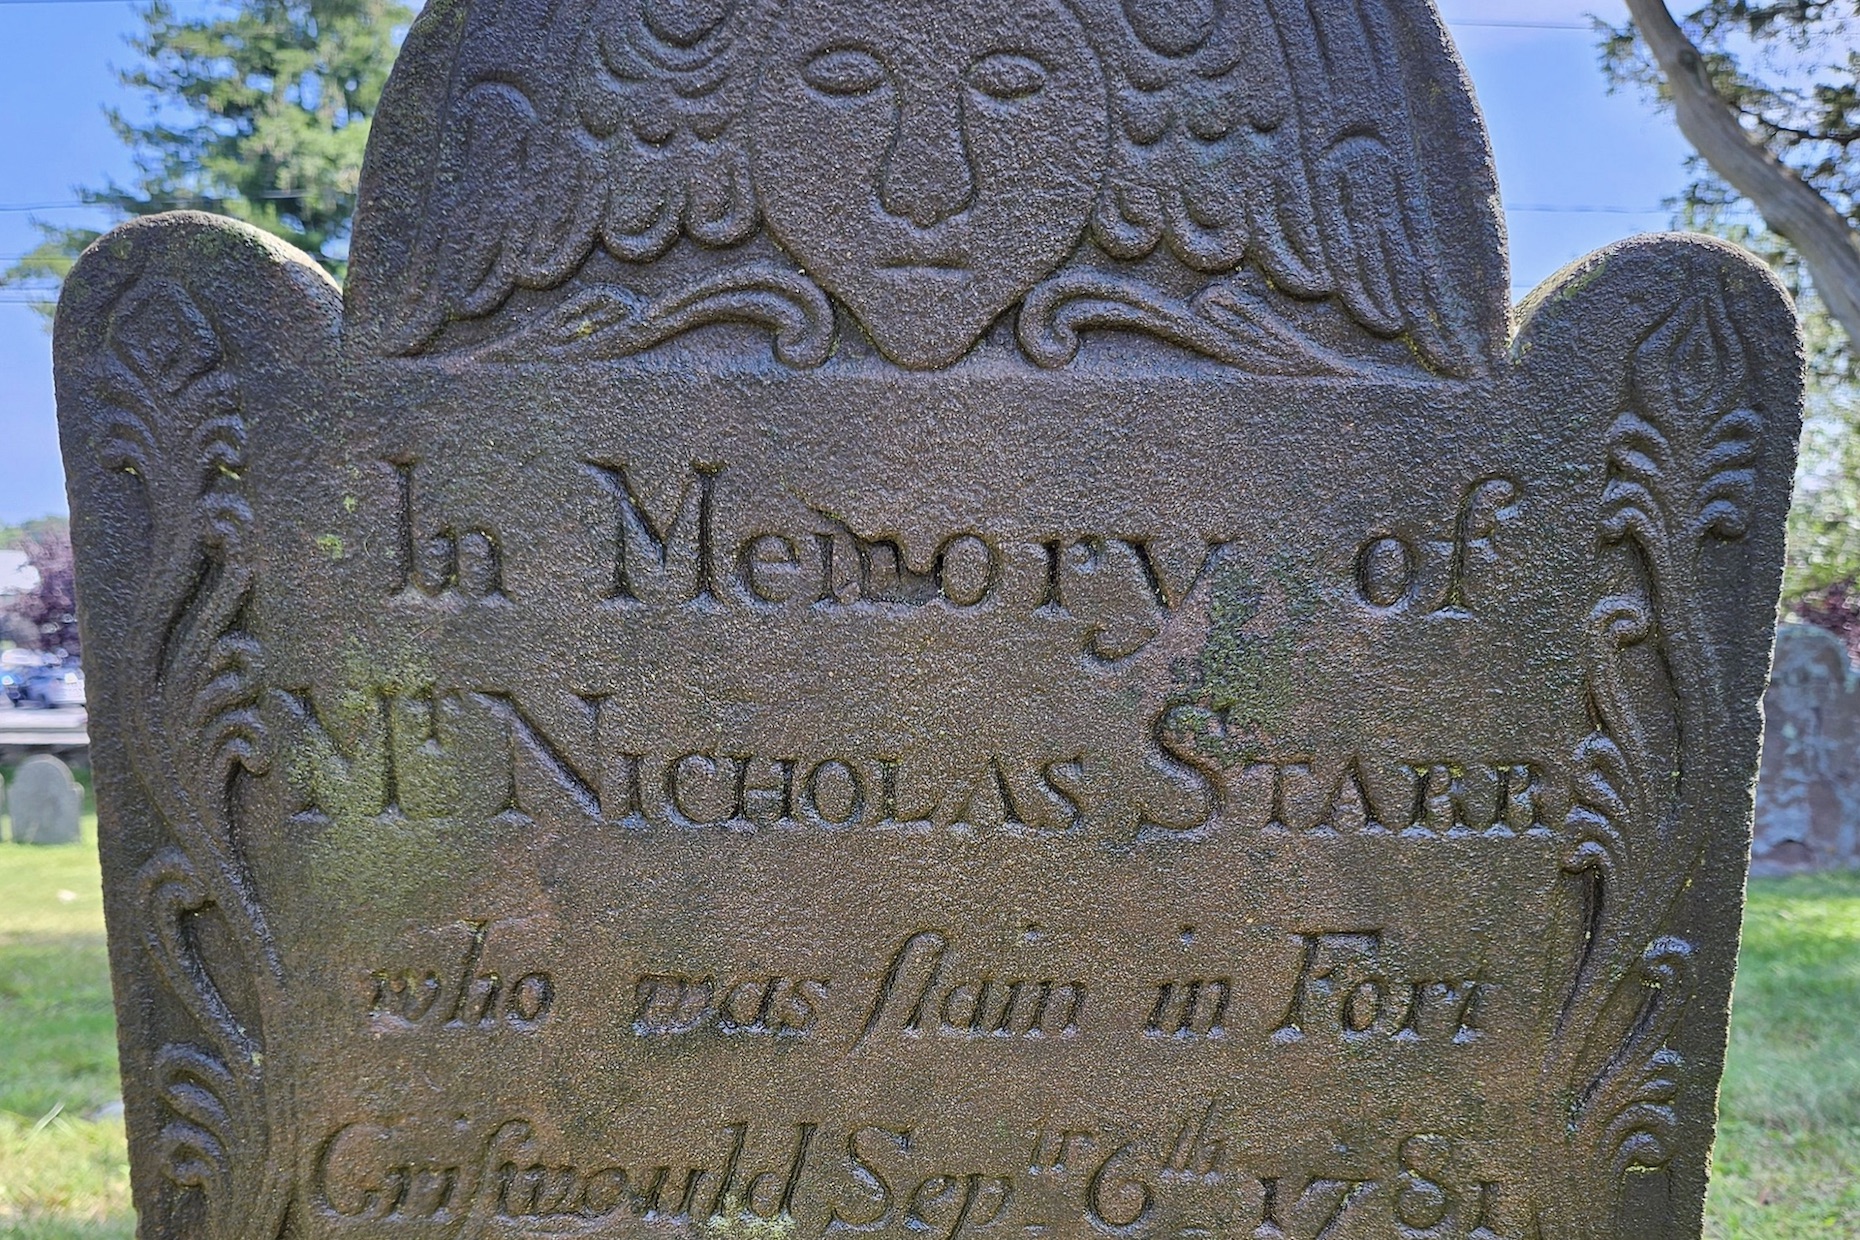 The gravestone of Nicholas Starr is one of many memorializing the victims of the Fort Griswold massacre.